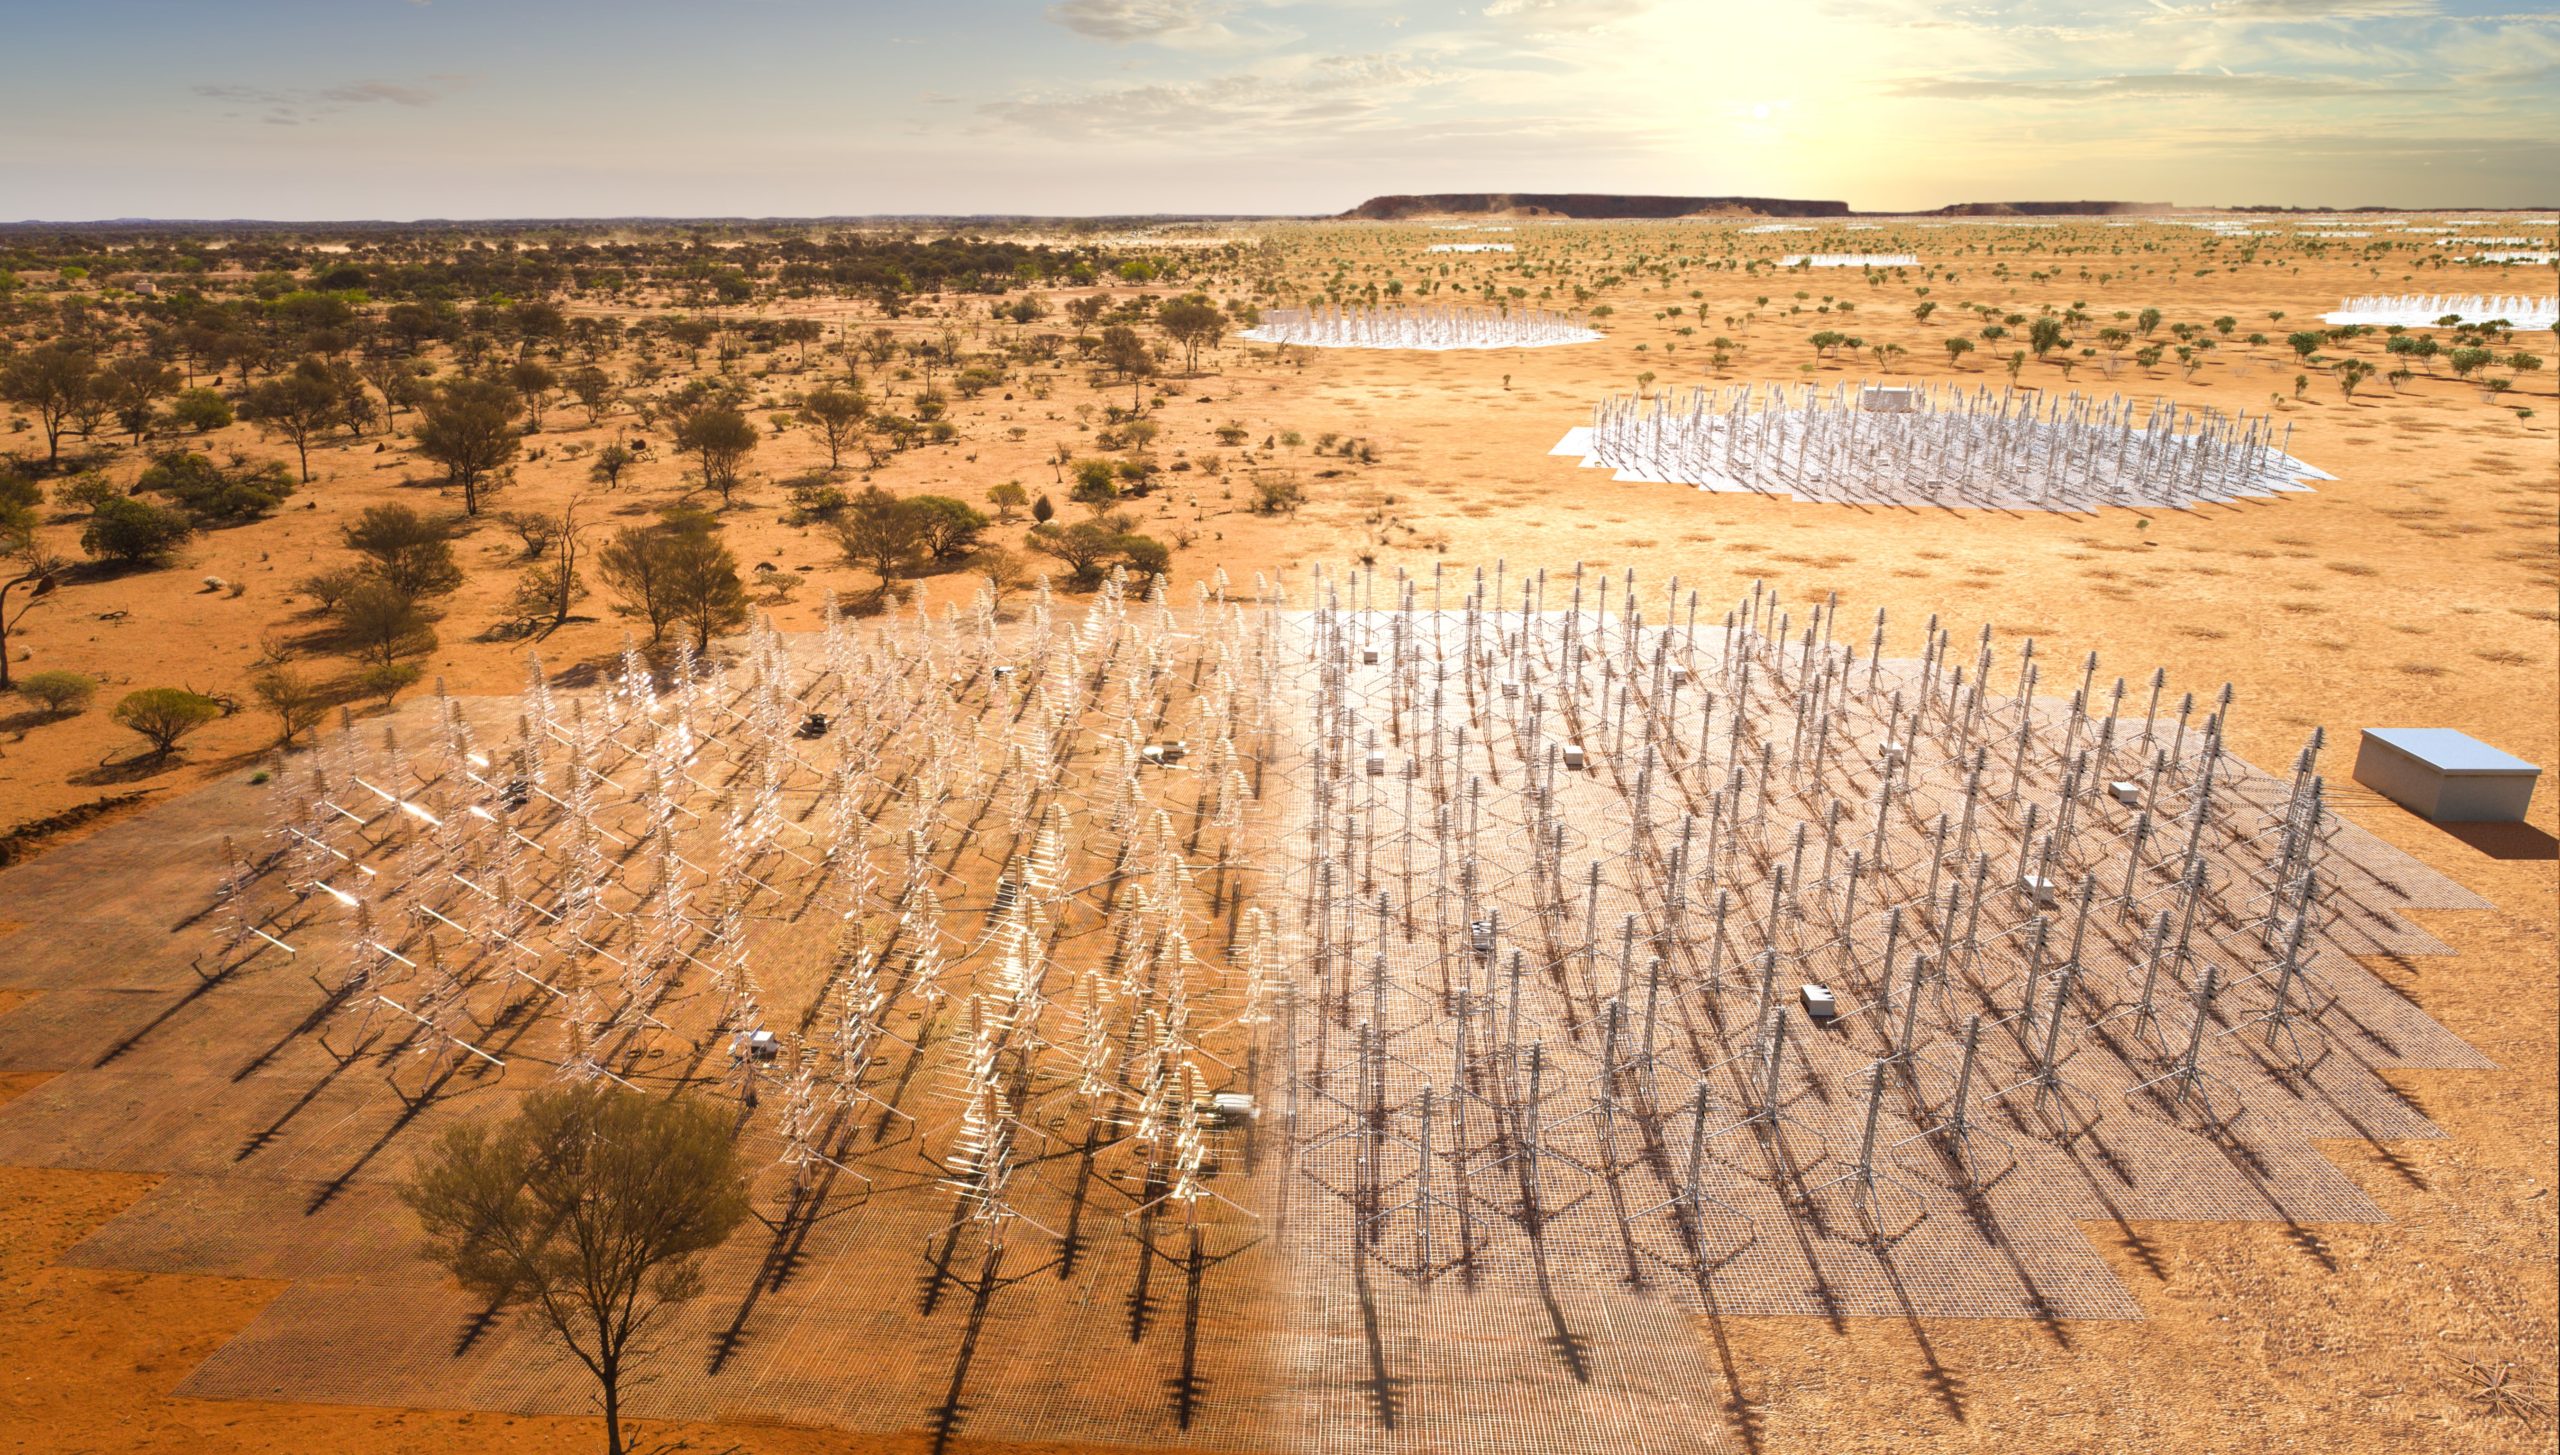 Construction Of The World’s Biggest Radio Telescope Is Officially Underway